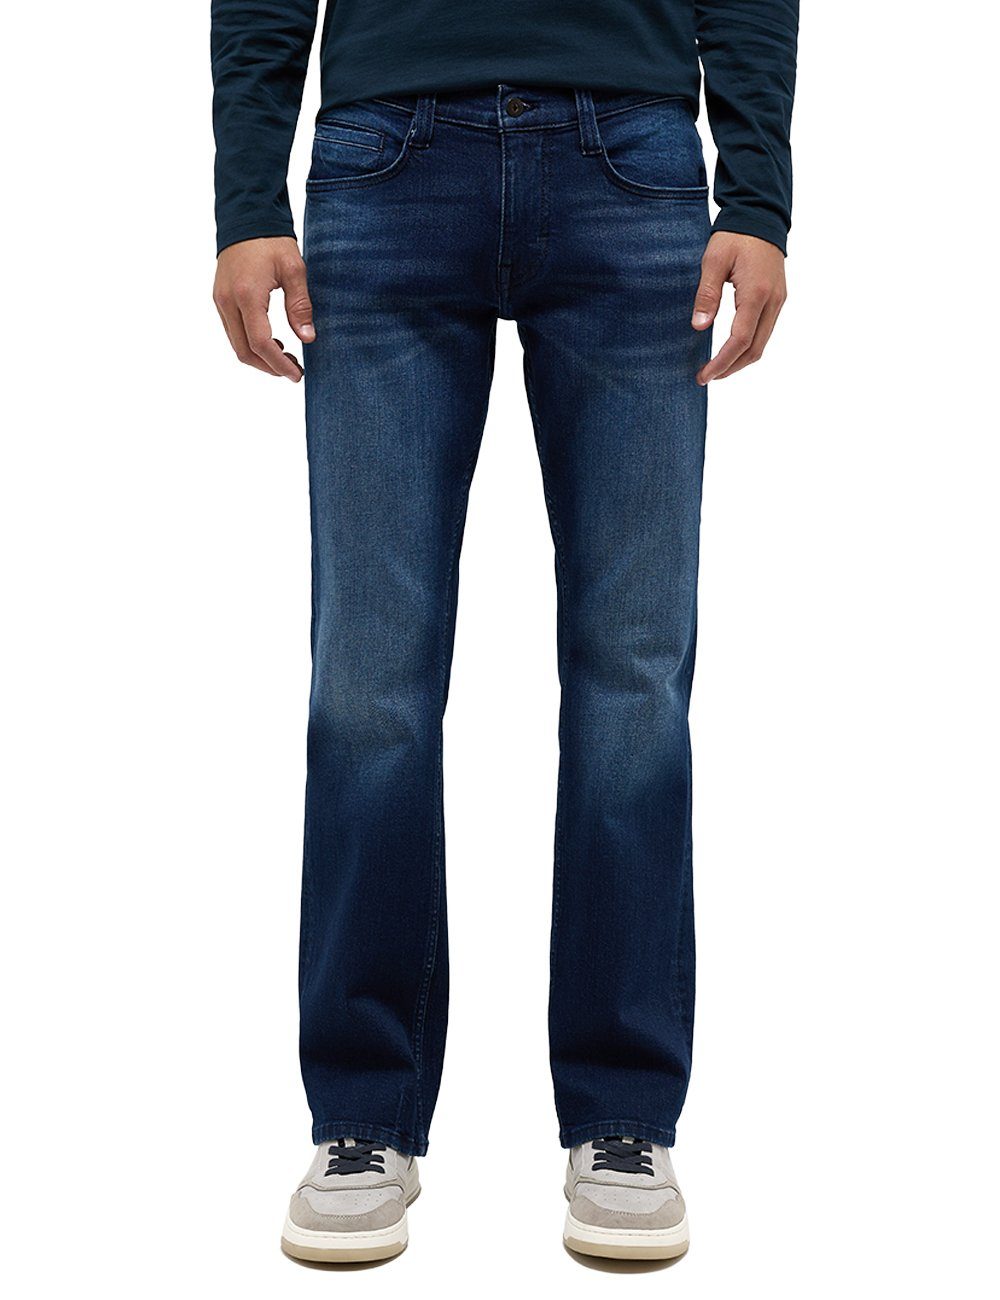 Style MUSTANG Boot super dark Bootcut-Jeans Oregon